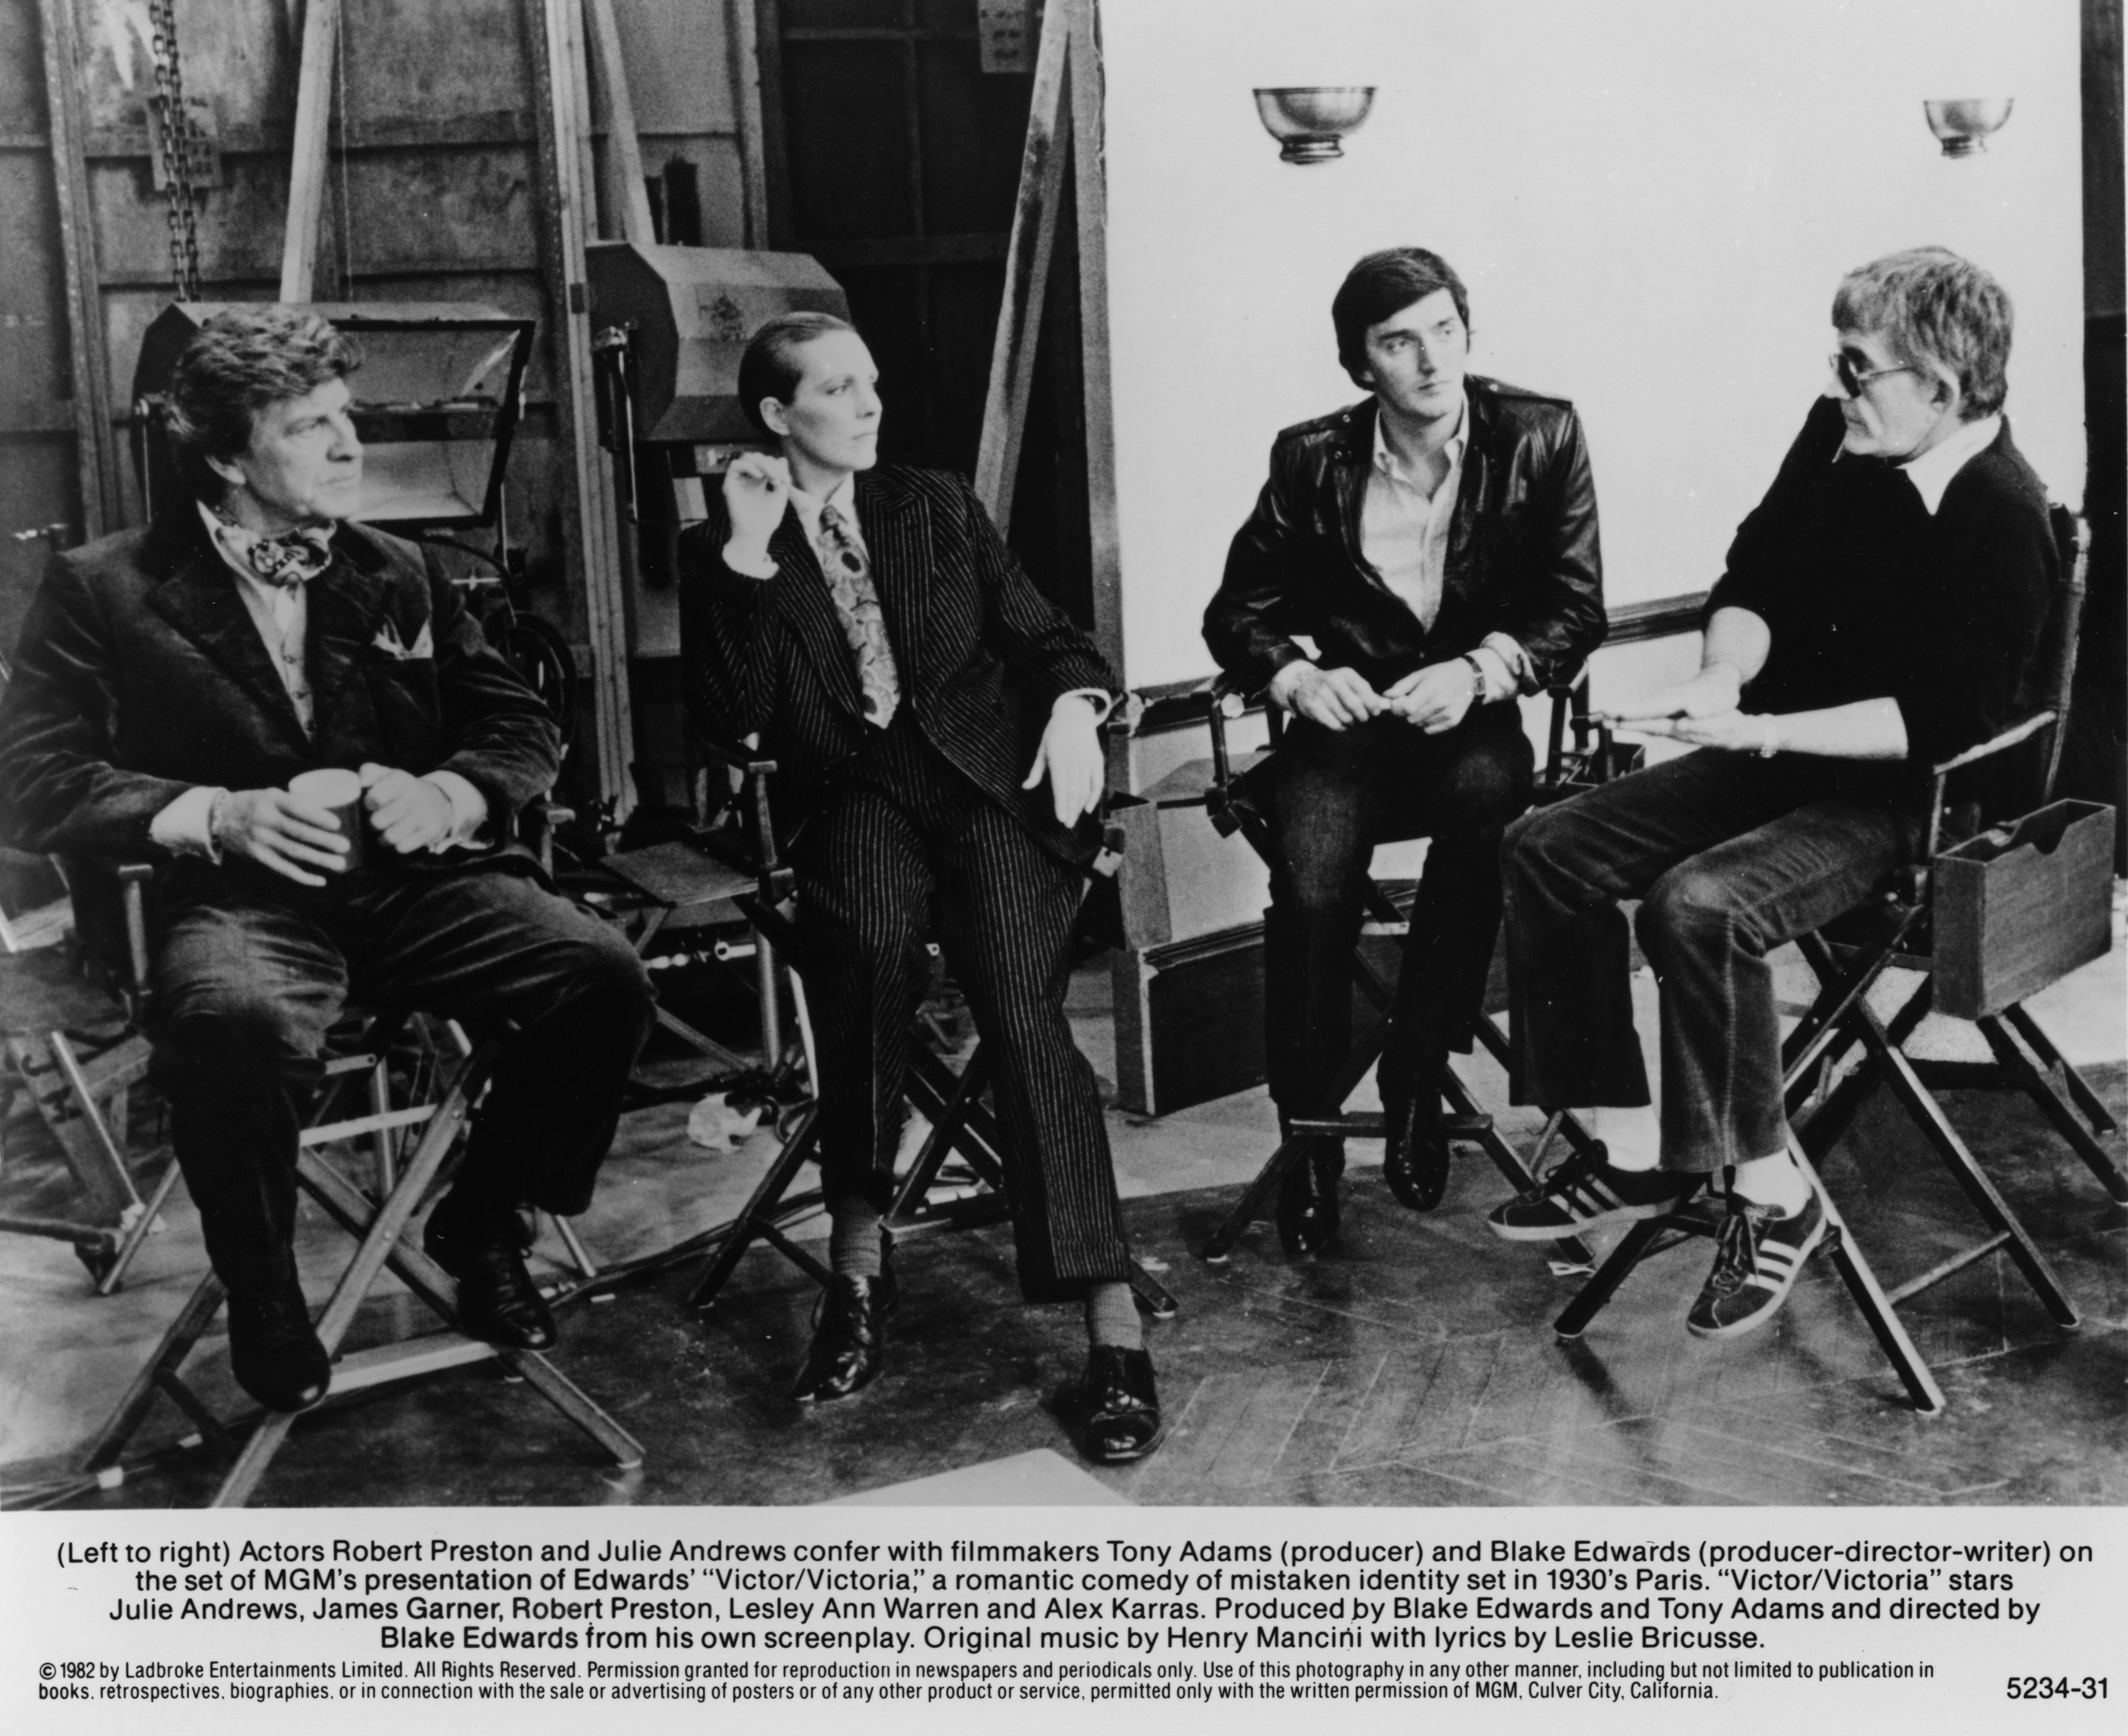 Robert Preston, Julie Andrews, Tony Adams, and Blake Edwards on the set of "Victor/Victoria," circa 1982. | Source: Getty Images